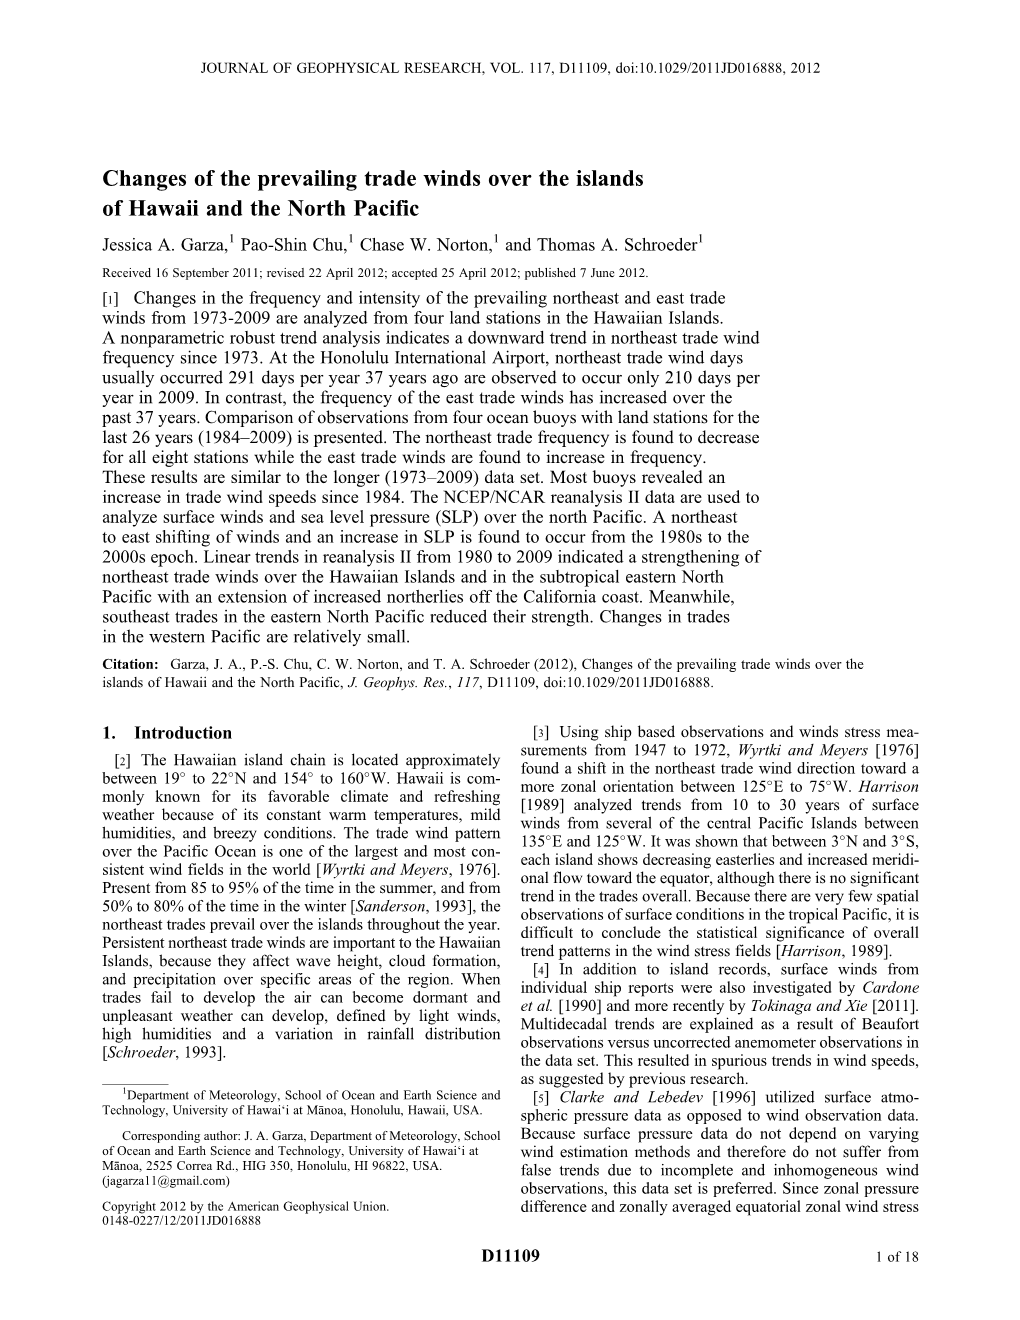 Changes of the Prevailing Trade Winds Over the Islands of Hawaii and the North Pacific Jessica A